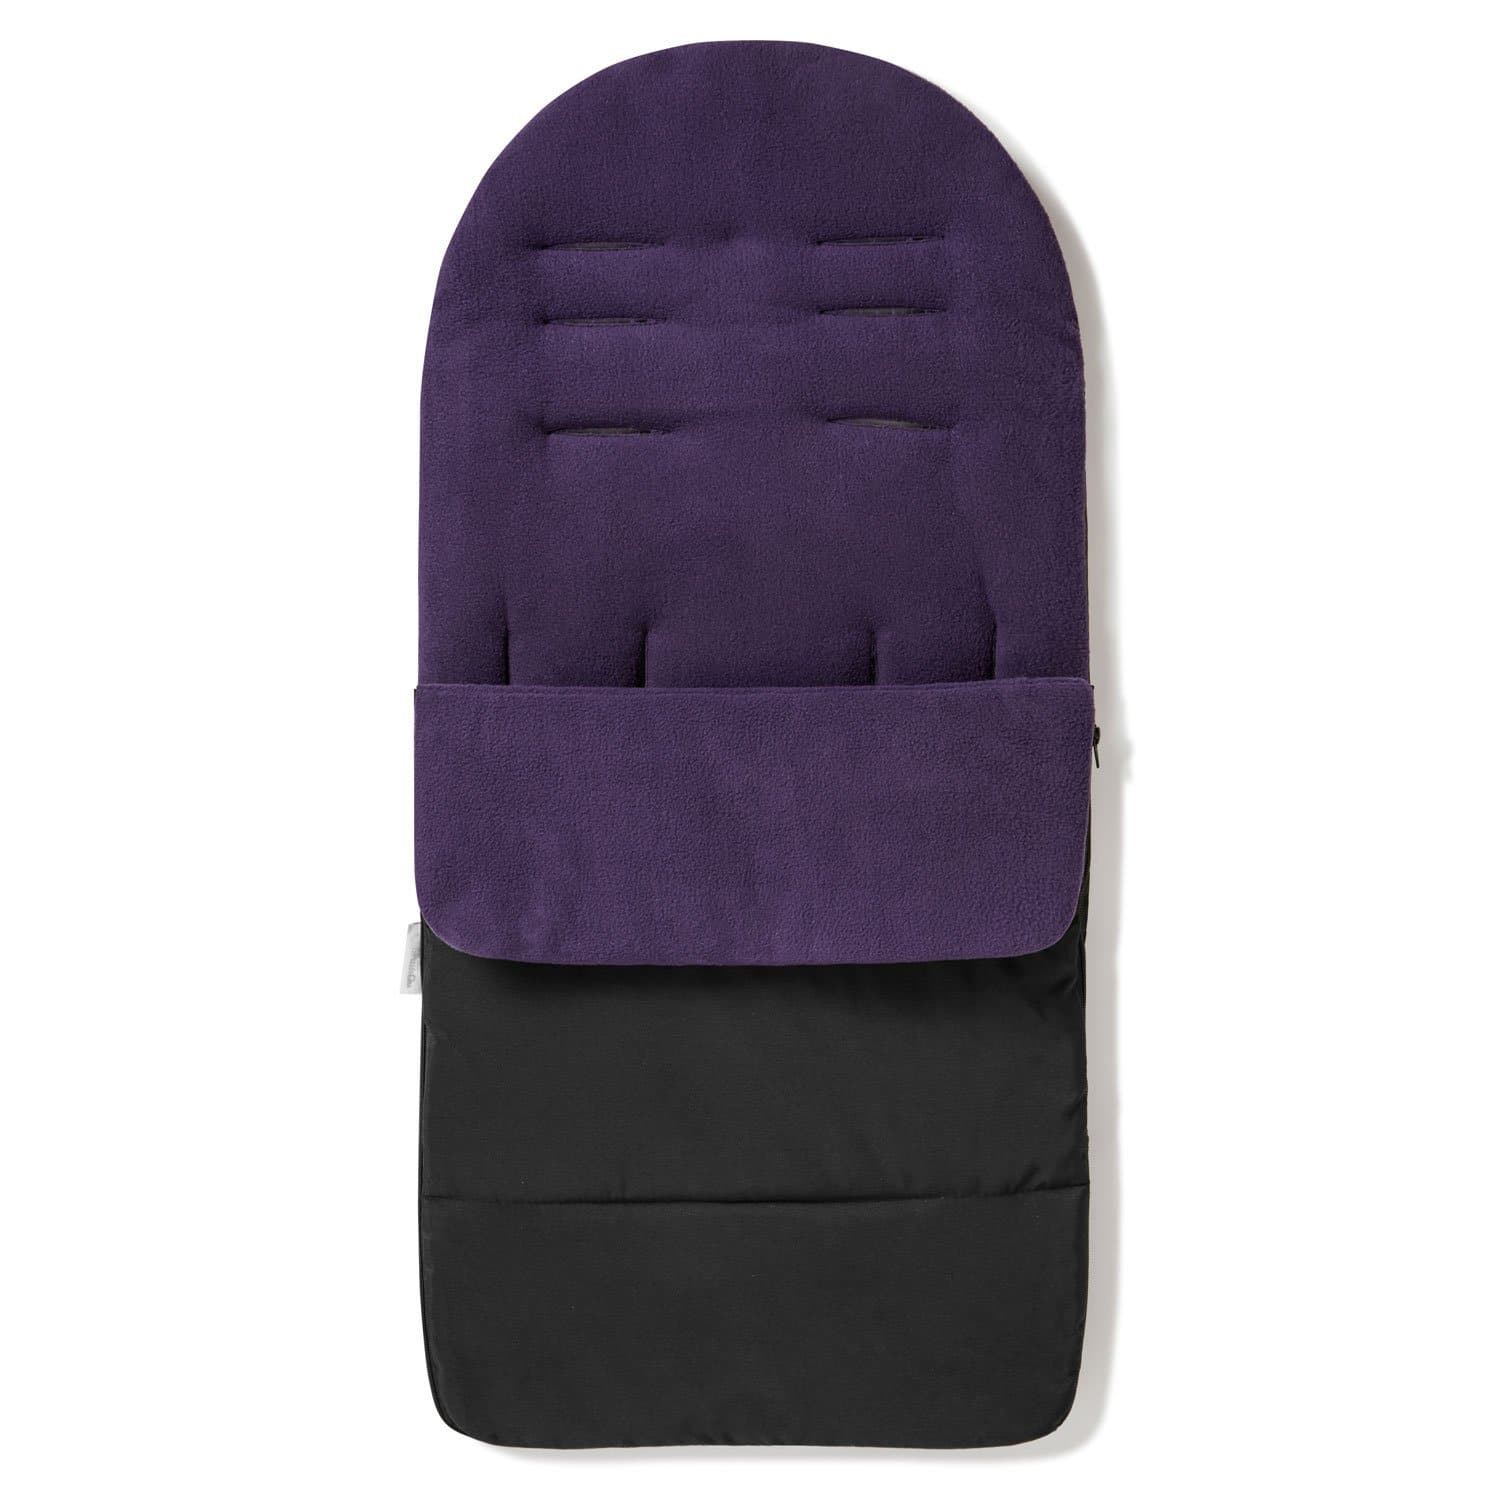 Premium Footmuff / Cosy Toes Compatible with Bebecar - Plum Purple / Fits All Models | For Your Little One